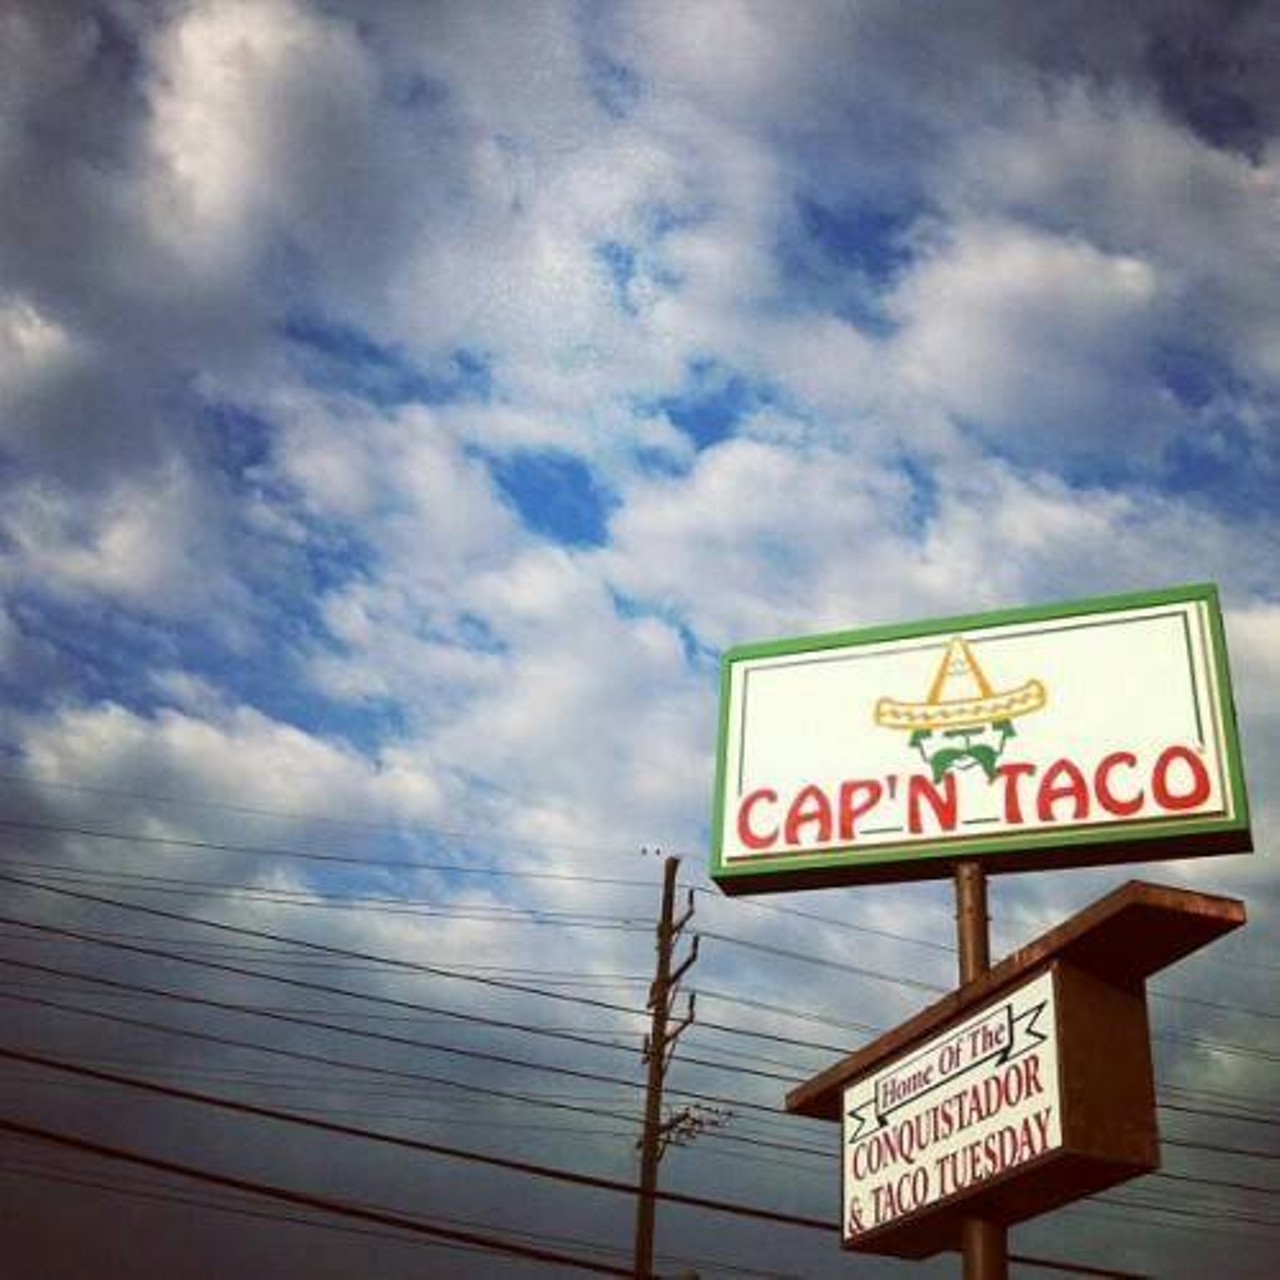 Best Fast Food Style Tacos: Cap'n Tacos
16099 Brookpark Rd, Brook Park, 216-676-9830
Laura&#146;s take: This is a Cleveland-area classic that everyone should try. Dine in, drive through, or take out. Taco Tuesday specials as well, with hard-shell beef tacos just 79 cents. 
Photo via Facebook